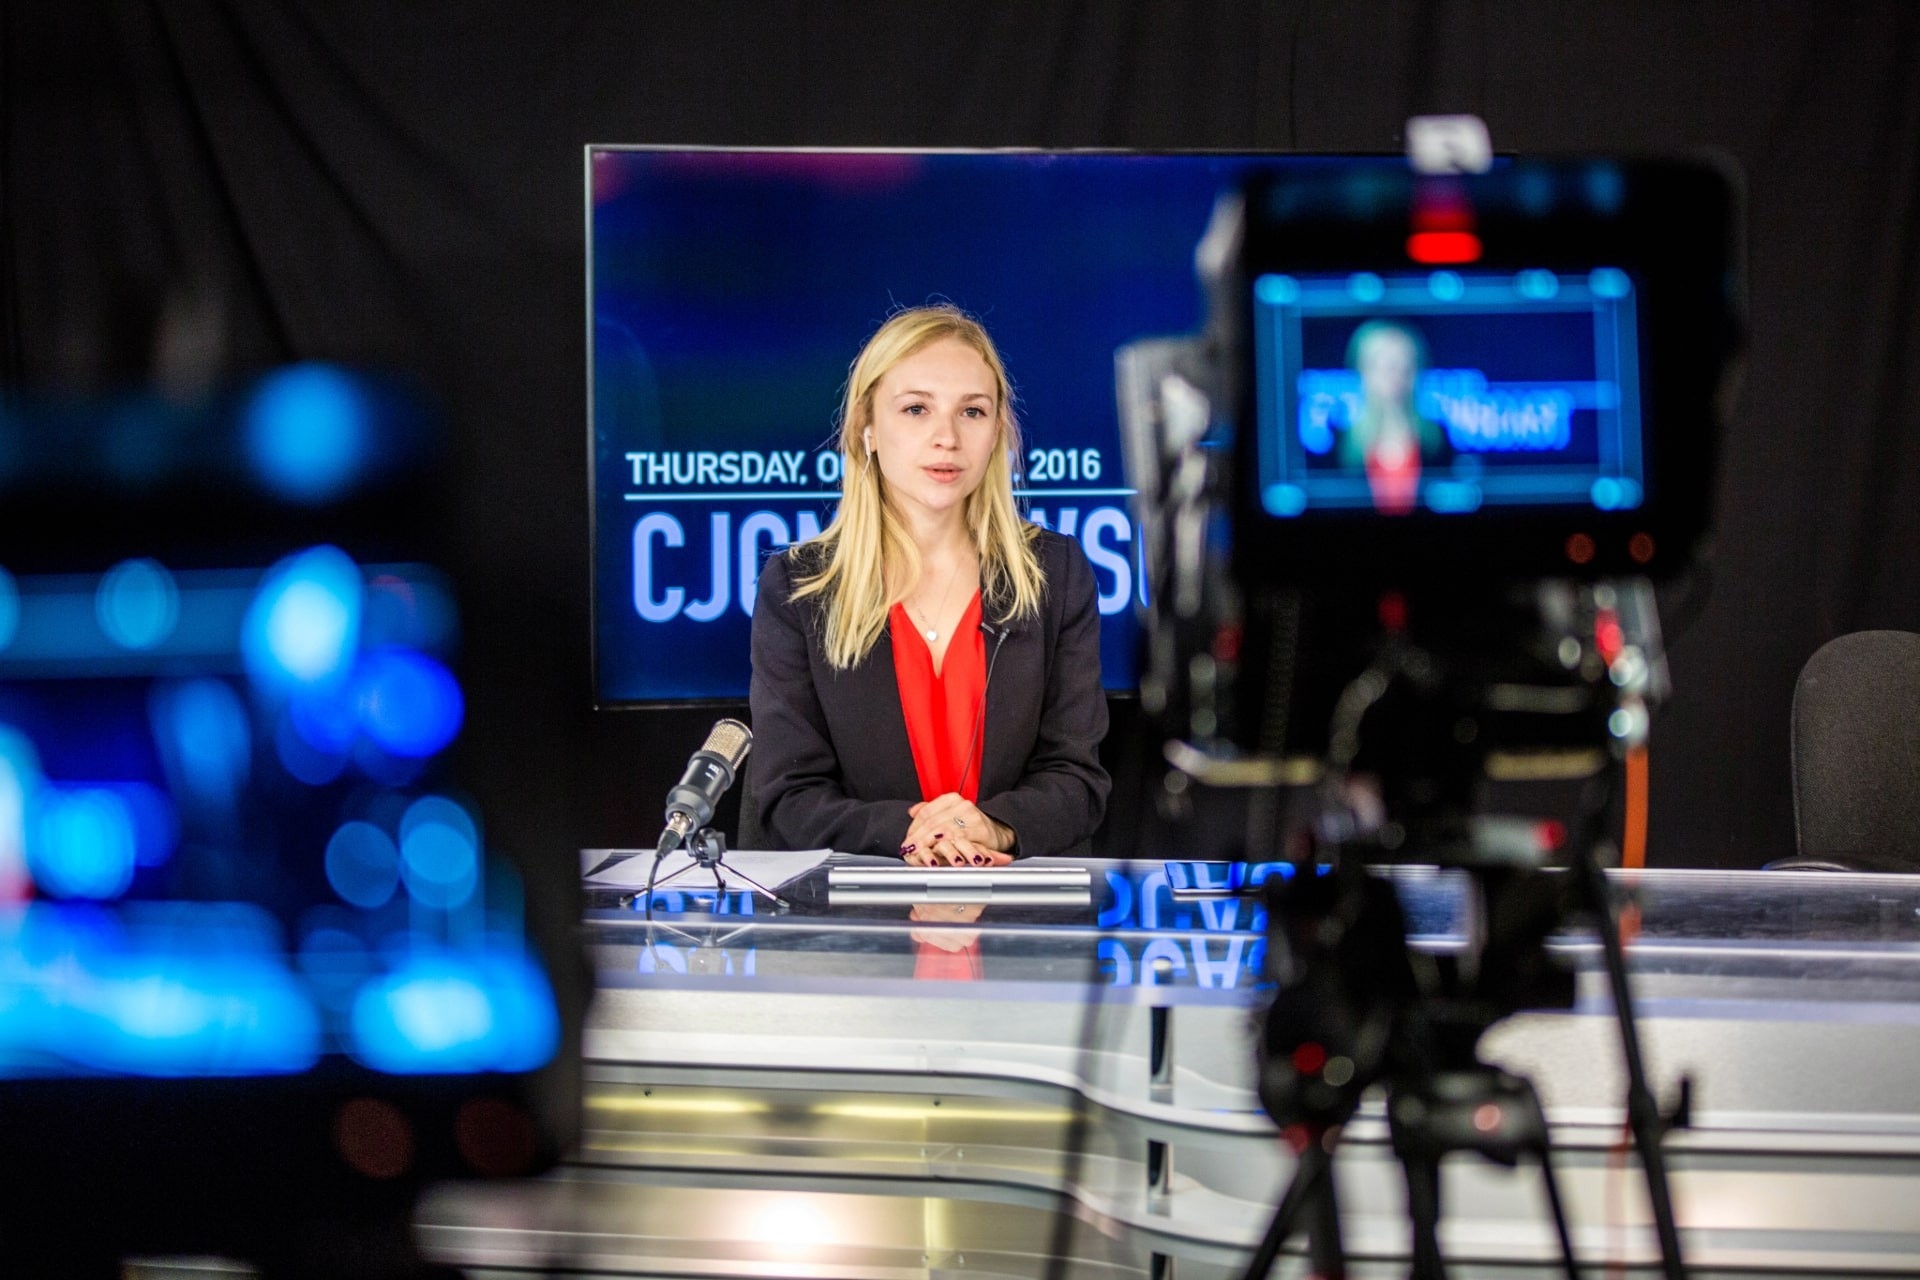 Woman in front of cameras in a studio